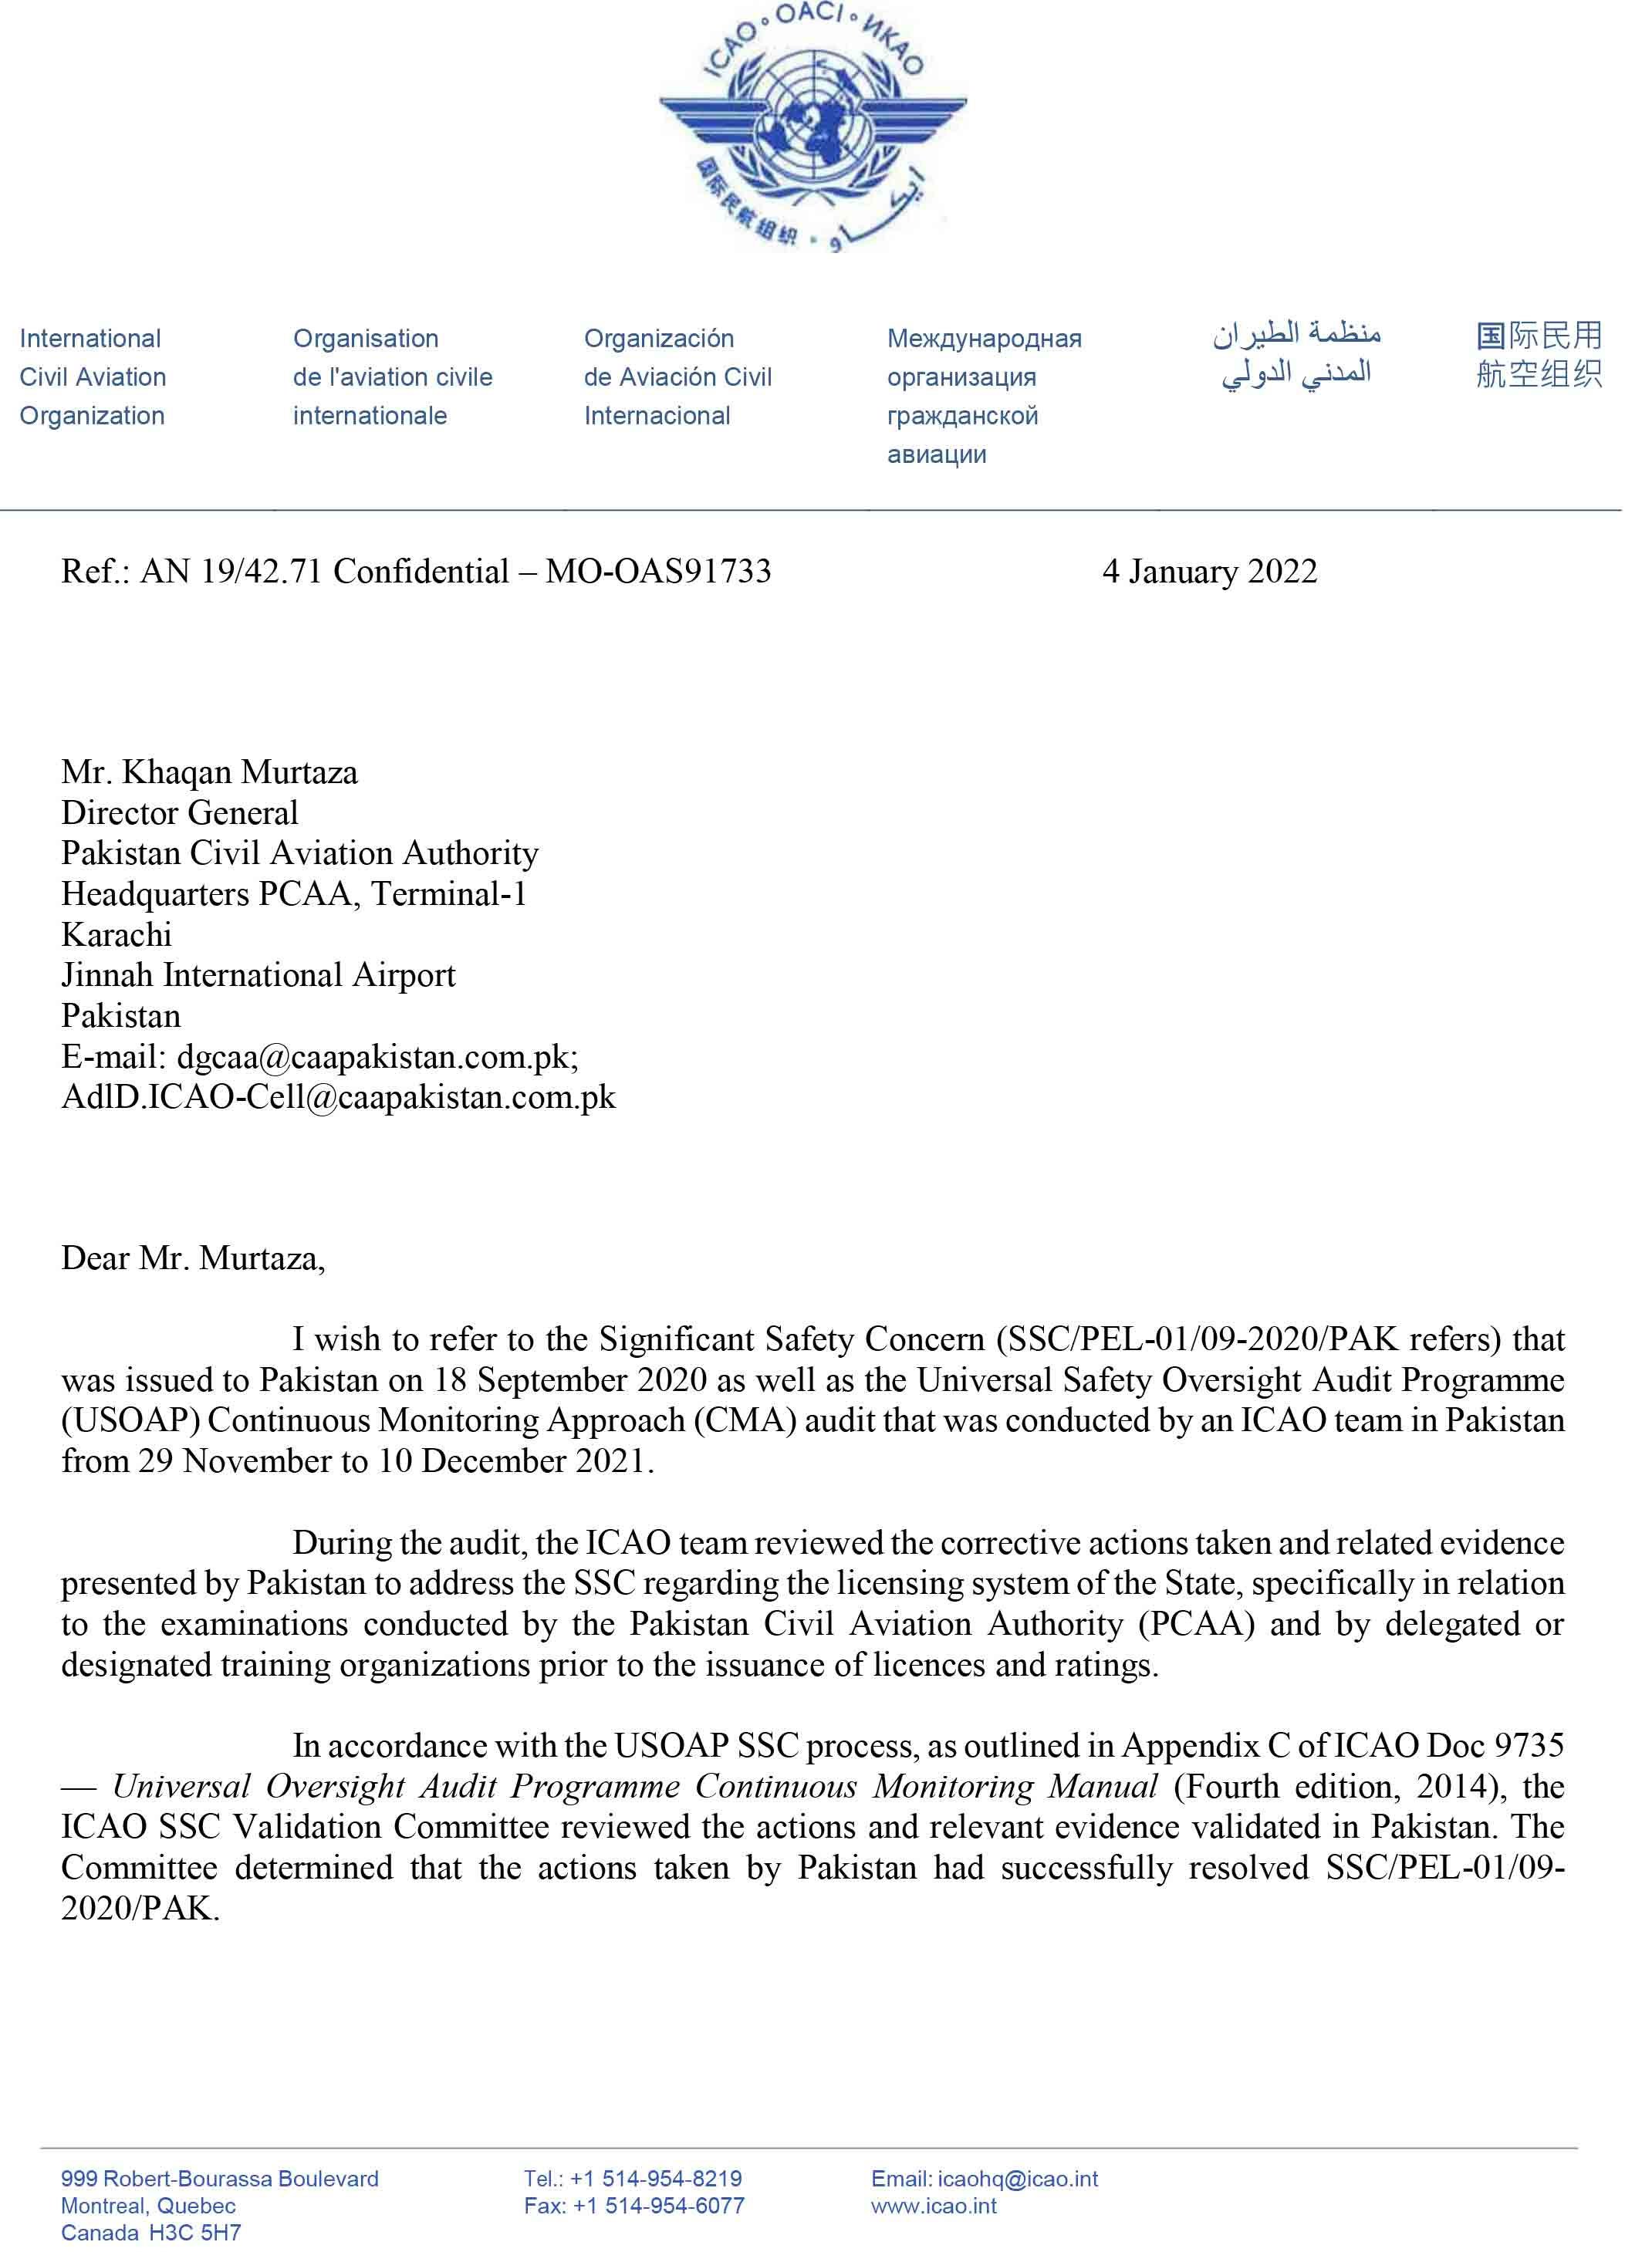 ICAO letter to Pakistan